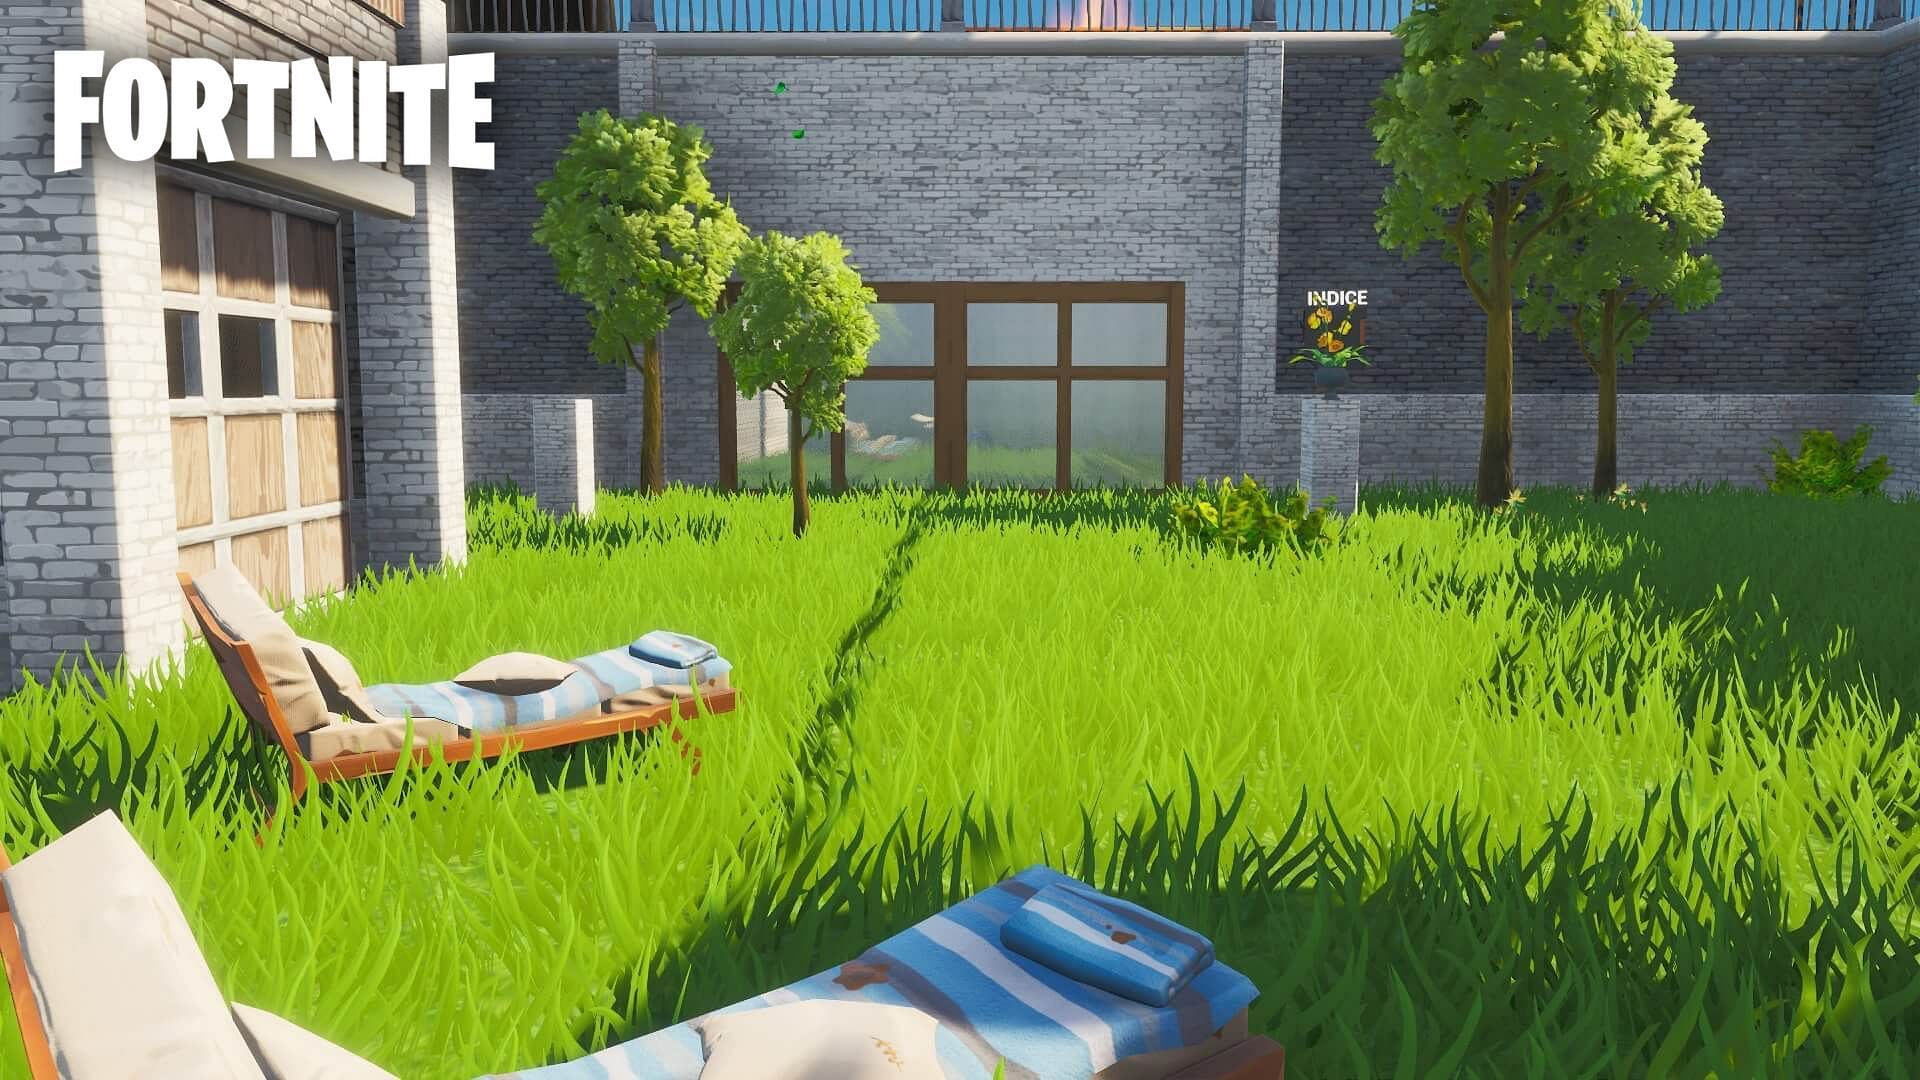 TRY AND FIND THE SECRET DOORS - Fortnite Creative Map Code - Dropnite